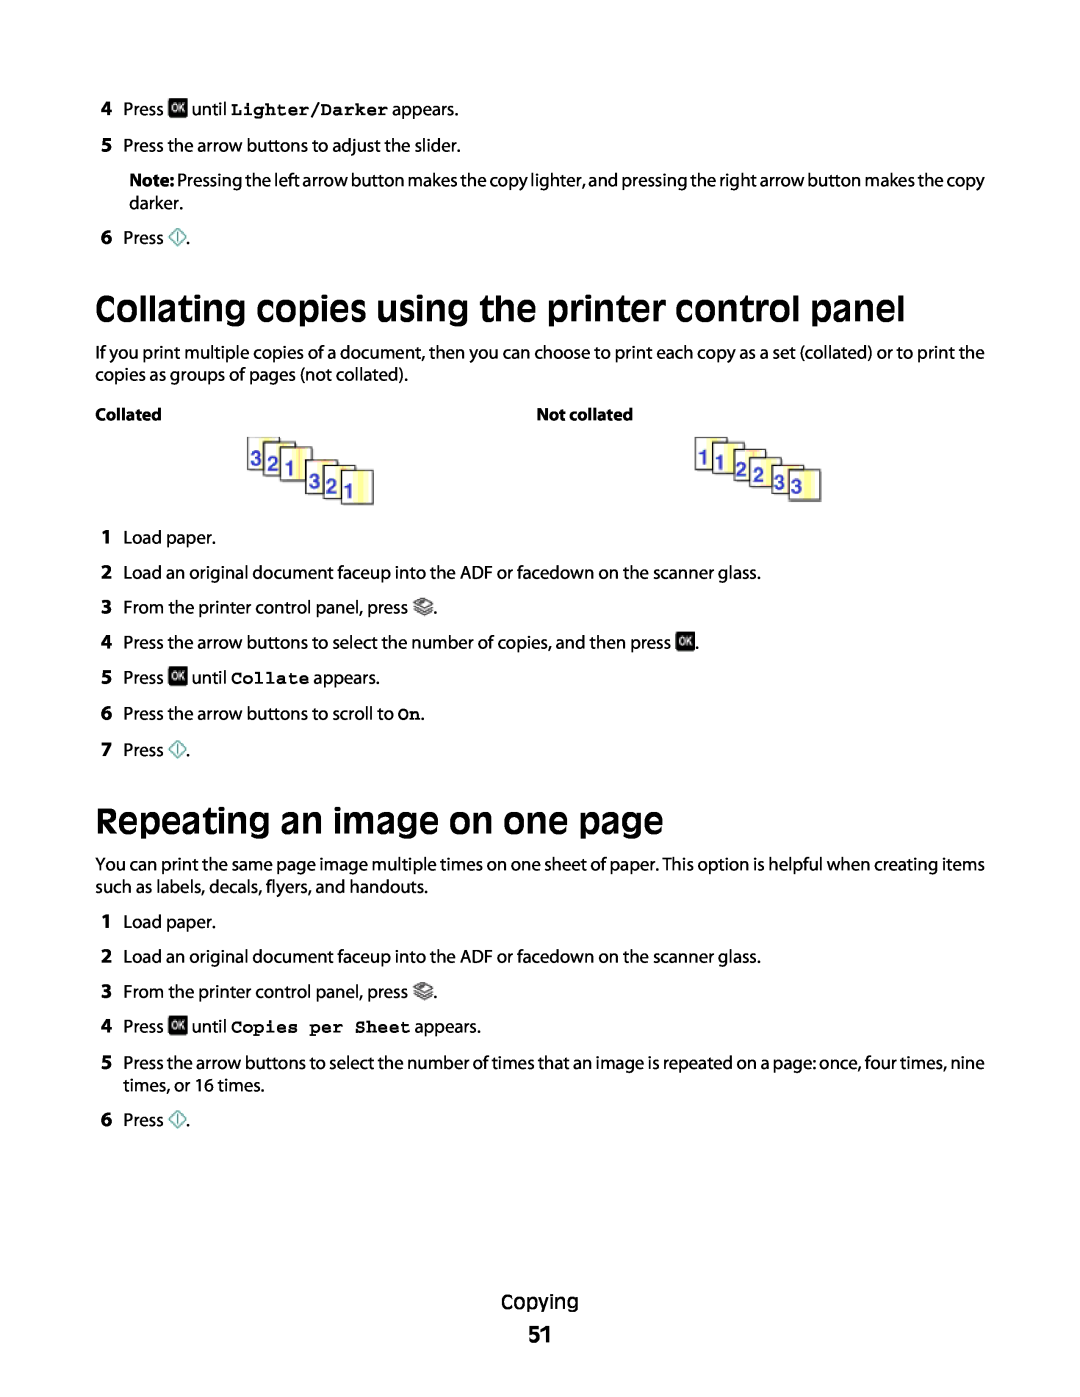 Lexmark 10E, 101 manual Collating copies using the printer control panel, Repeating an image on one page 